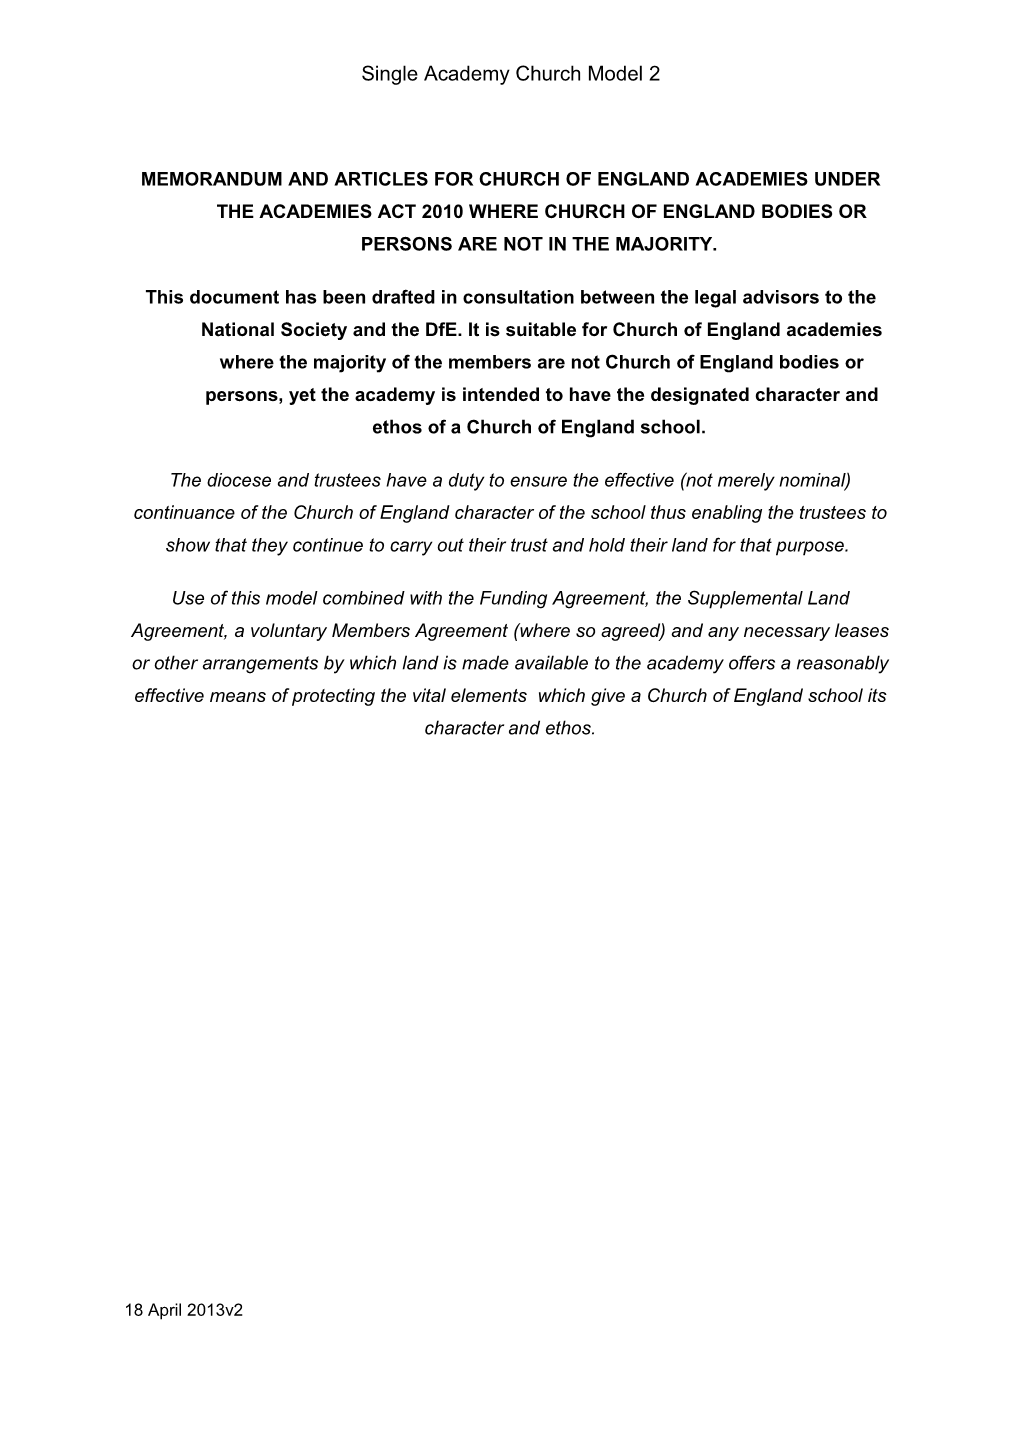 Memorandum and Articles for Church of England Academies Under the Academies Act 2010